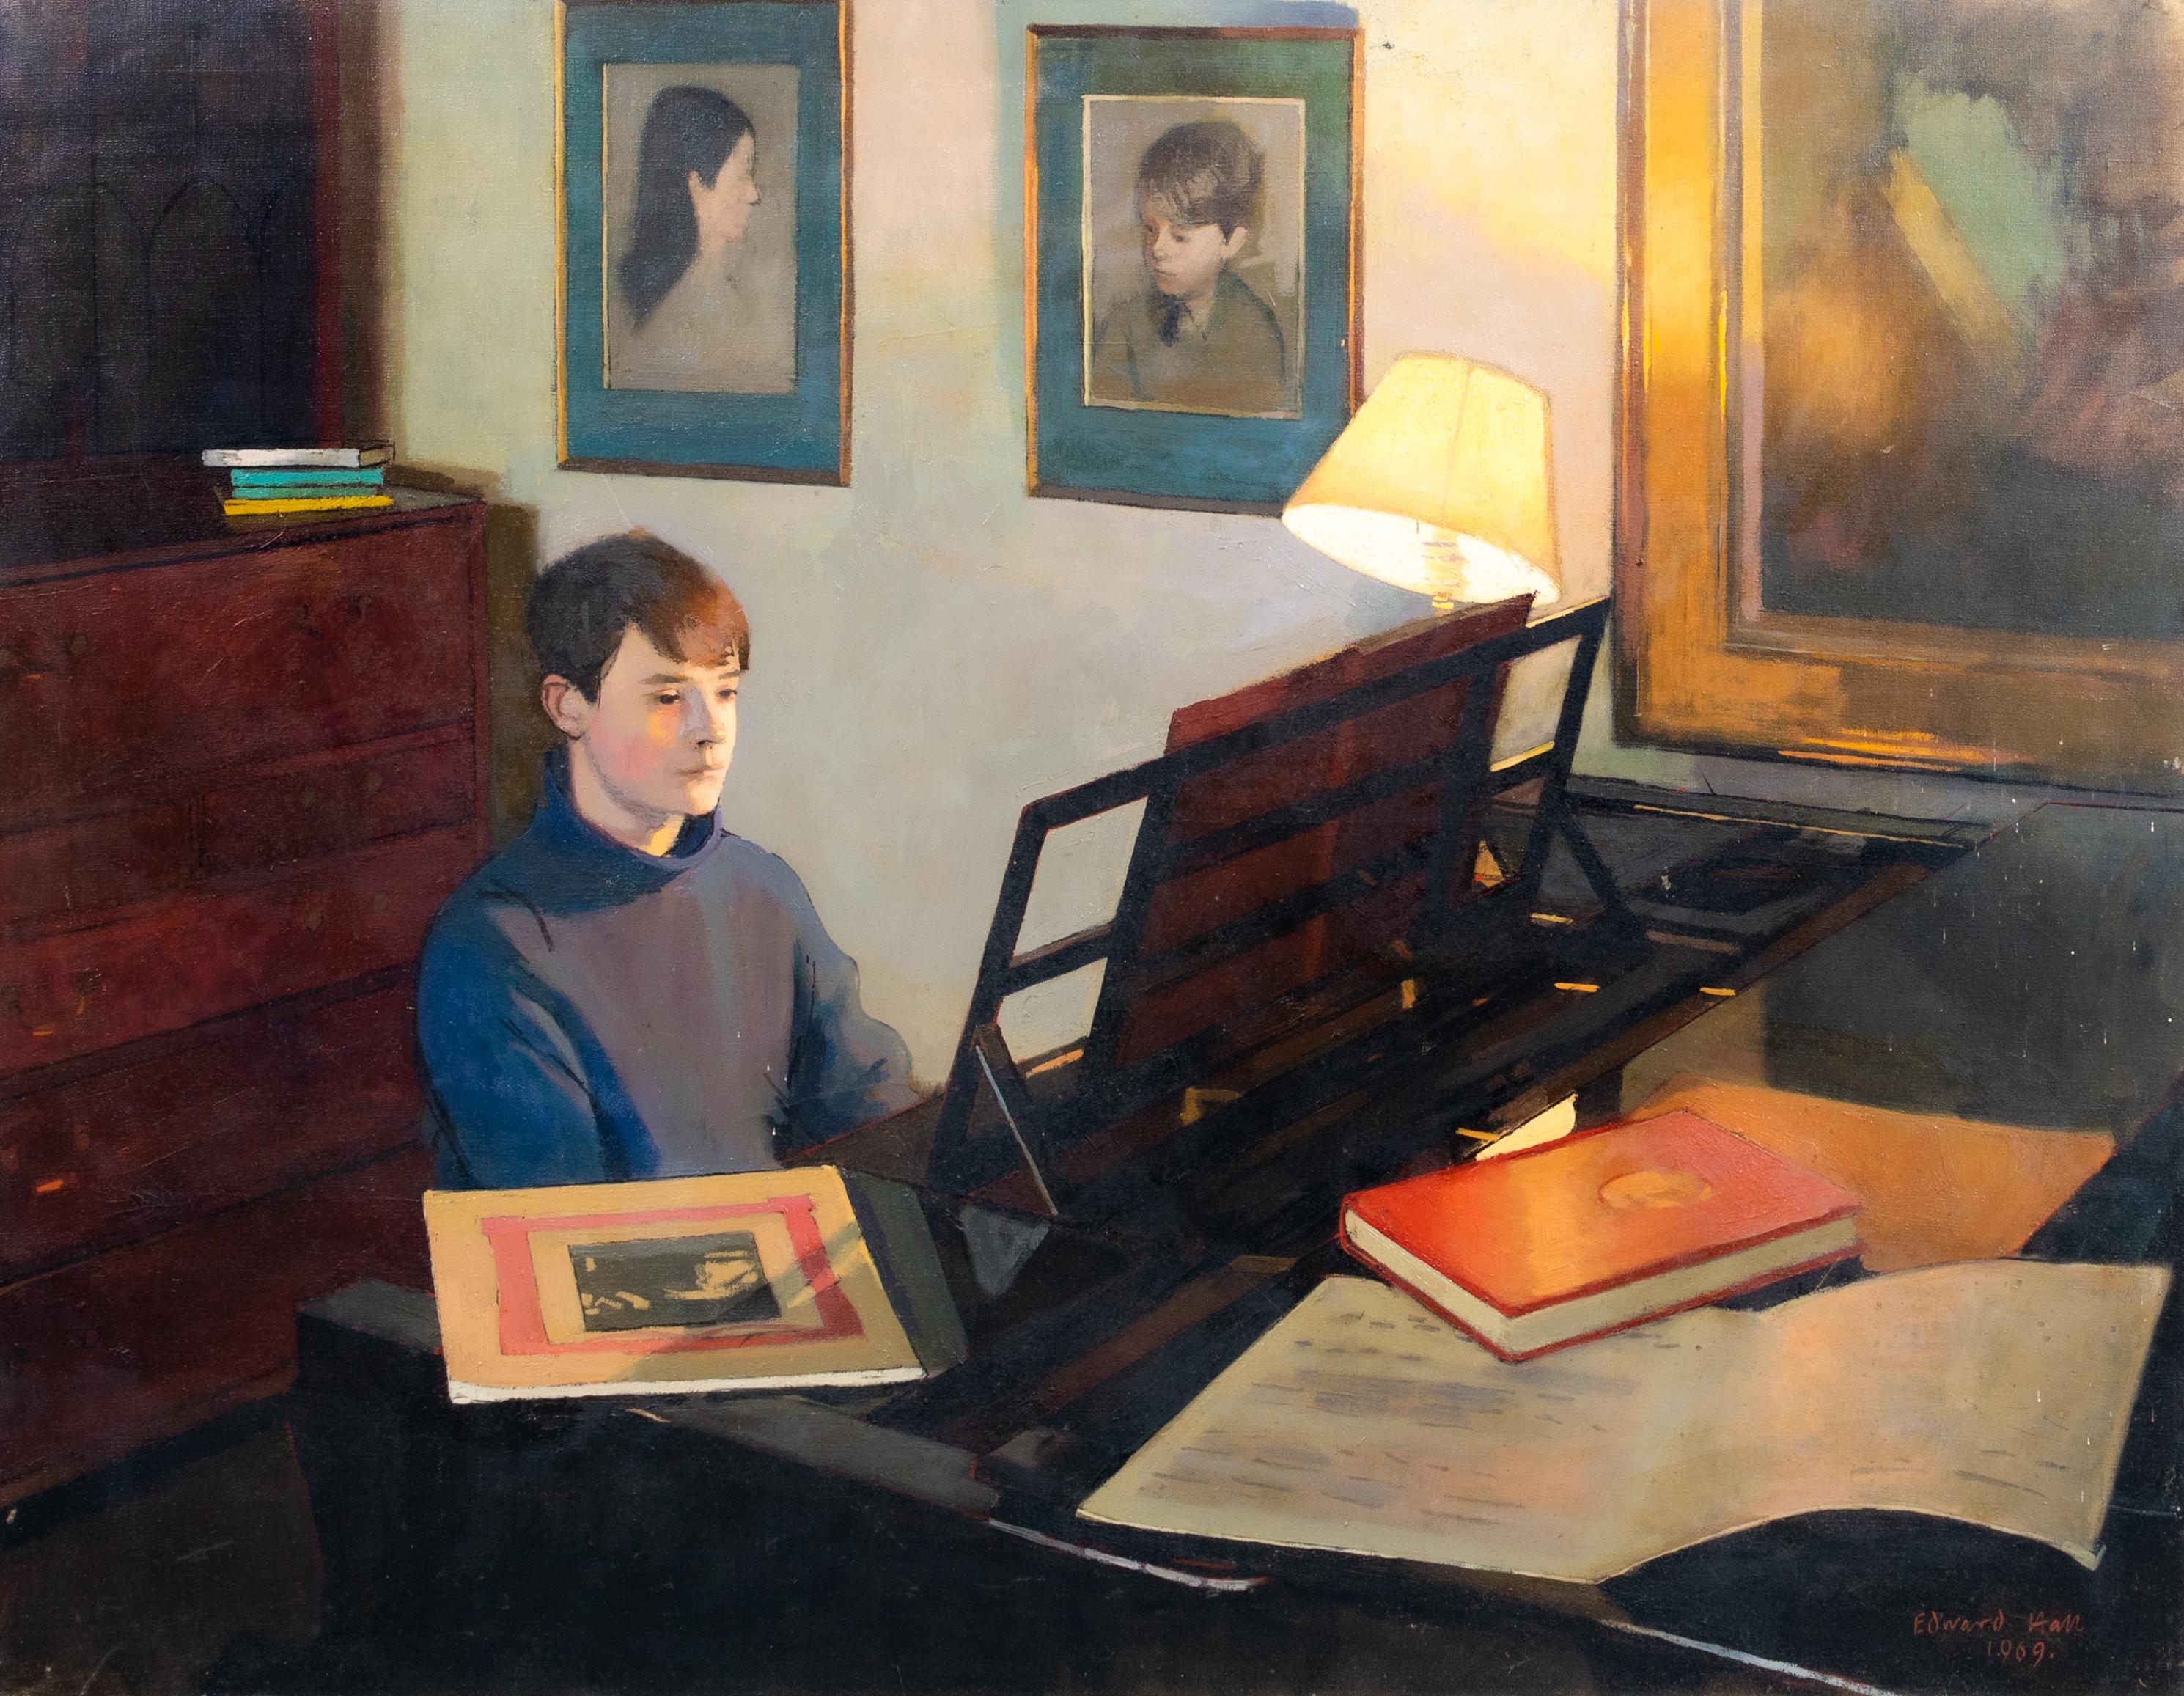 Matthew At The Piano, dated 1969

by EDWARD HALL (1922-1991)

Large 20th century portrait of Matthew at the piano, oil on canvas by Edward Hall. Good quality and condition interior scene of Matthew playing the piano in the evening illuminated by the